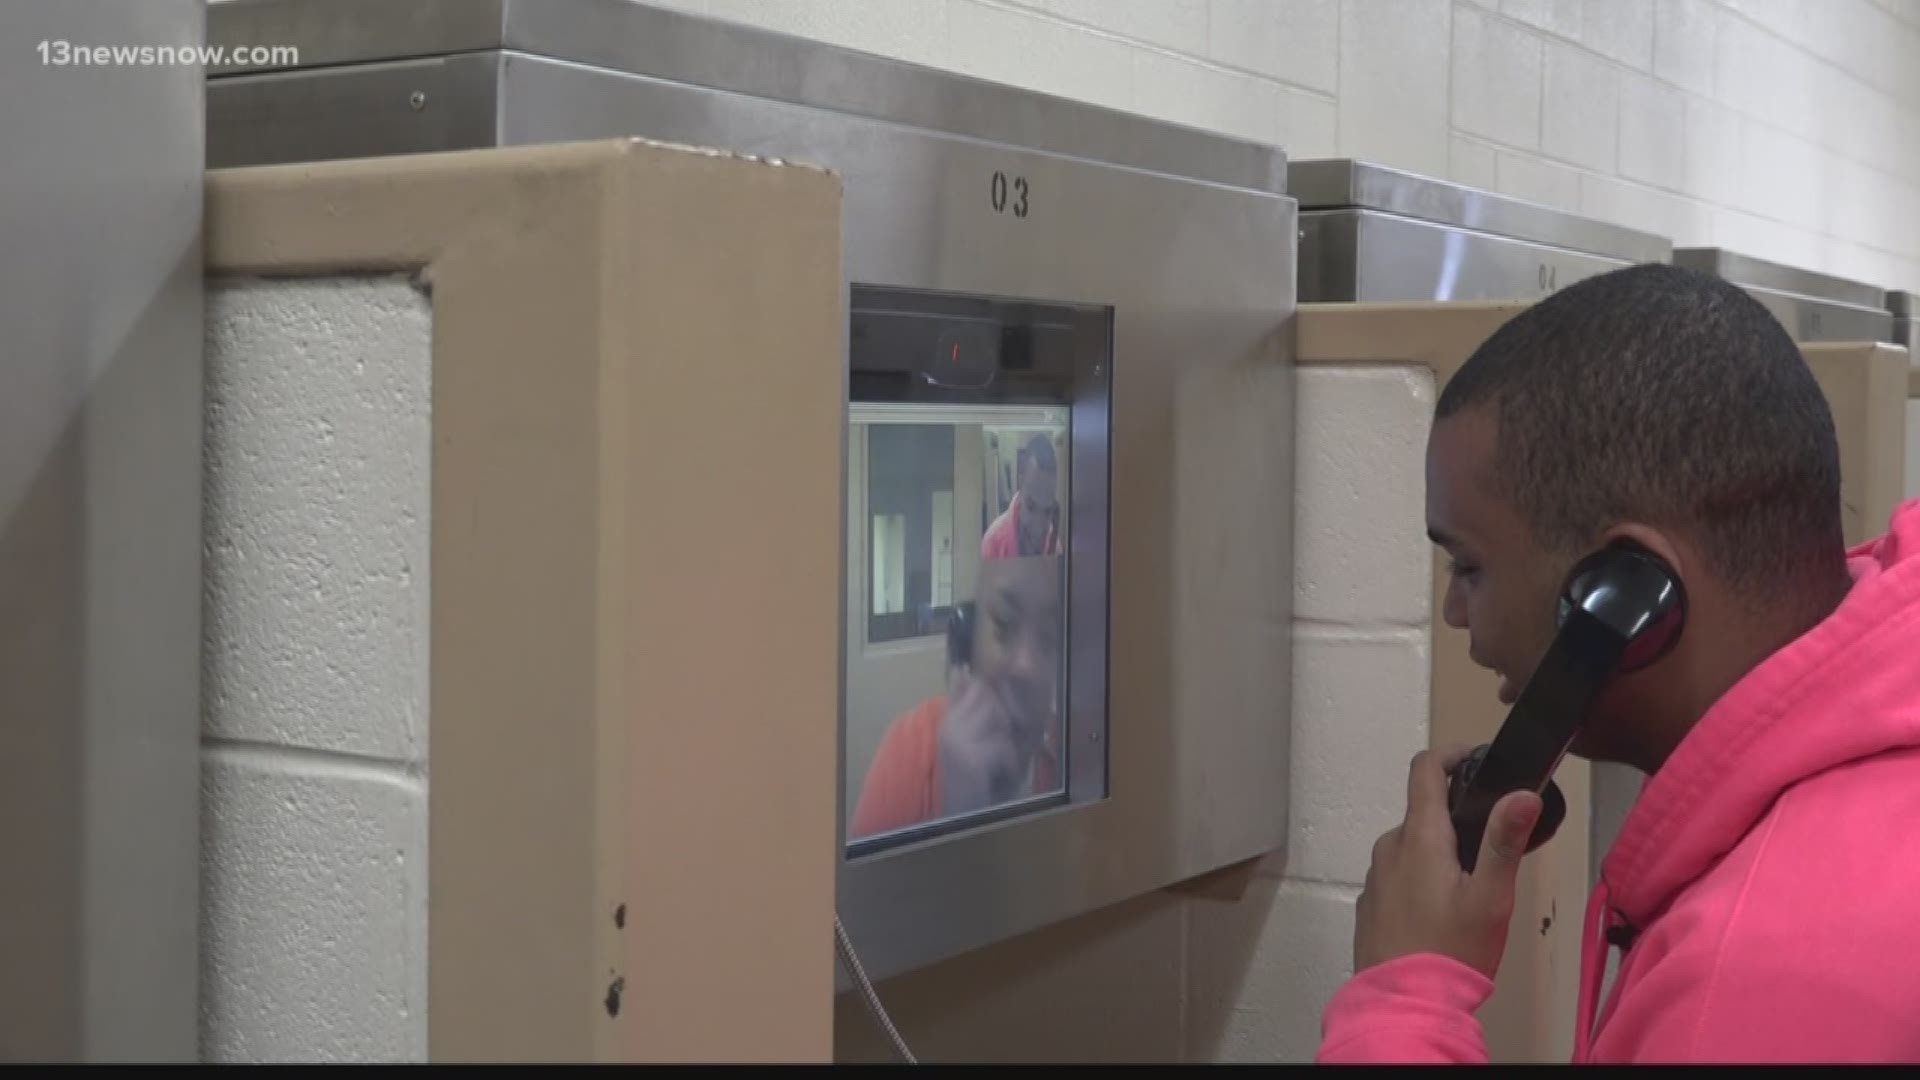 Inmates at the Virginia Beach Correctional Center can video chat with friends and family again. For three months the visitation system was down. It's been running successfully for a week now.